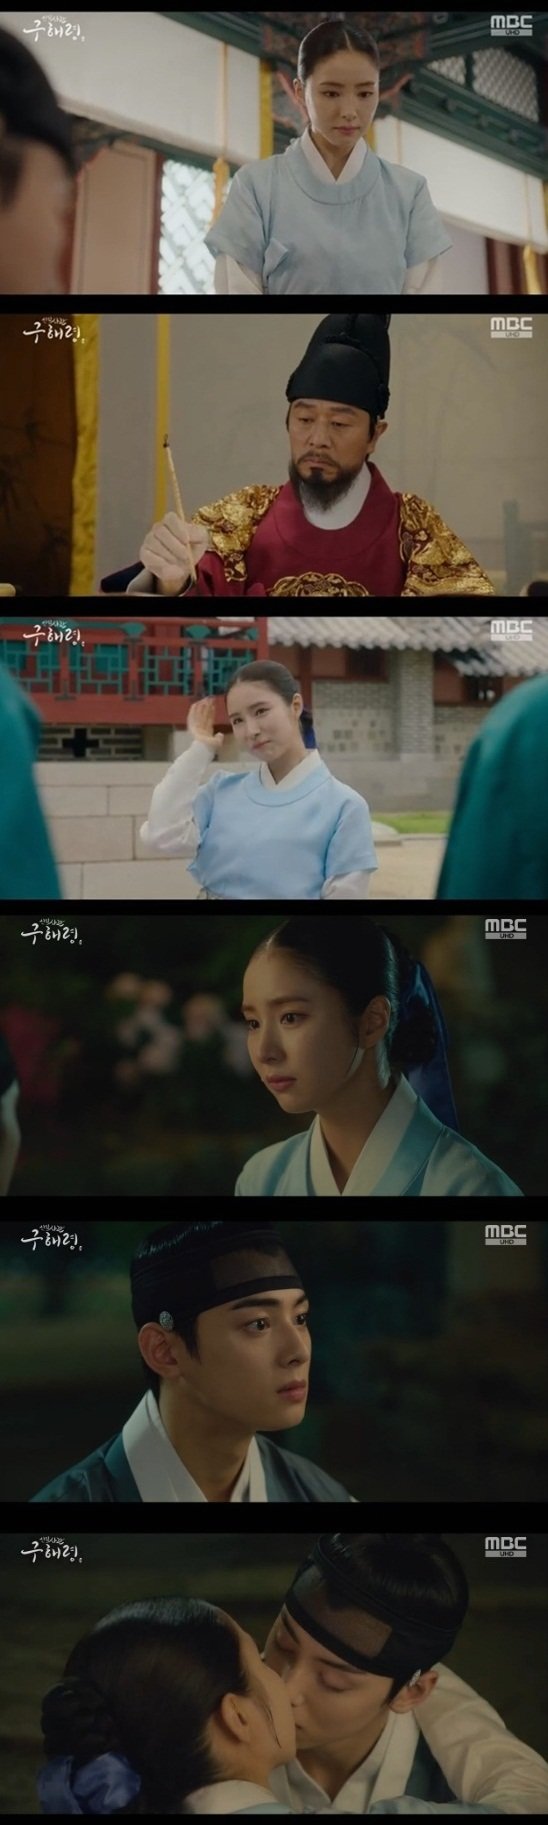 On the 22nd MBC drama New Entrepreneur Rookie Historian Goo Hae-ryung, Shin Se-kyung (Rookie Historian Goo Hae-ryung) and Cha Eun-woo (Lee Rim) were shown kissing each other after confirming each others hearts.Earlier, Cha Eun-woo was embarrassed by the remorse of King Kim Min-Sang (Lee Tae).I have never called for 20 years, but I suddenly asked me to give a preliminary letter, but I did not attend the contest with my servants, but I felt wondering about the change.Cha Eun-woo, who is slightly lacking in awareness, said, Three of the six are true. He did not spare his bitter voice toward his father.Everyone looked worried, but alone satisfied, innocently asking how Shin Se-kyung had seen her. She didnt hate it, she came lovingly.Shin Se-kyung was a woman who could play the game; Kim Min-Sang was openly harassing Shin Se-kyung to find out what he wrote down in the shootout.I will listen to everything I want except the throne, so please tell me what it is. I did not write anything on that day.I did not hear anything, Kim Min-Sang said.He wisely talked about what he had experienced so far and got the heart of Kim Min-Sang and acquired the independence of the e-mailer in the future.The promising bitch, but Kim Min-Sang acknowledged Shin Se-kyungs wisdom and party liaison.That was also the point that son Cha Eun-woo had fallen for her.Shin Se-kyung, who was so full of Cha Eun-woos heartfelt, melted down.I was able to feel the heartfelt heart when I saw the poem that he wrote, I want to live my love for a long time and be my master forever.At first, the meeting was made with grunting and tit-for-tat relationships, but it was developed into a current relationship by attracting each others charms.